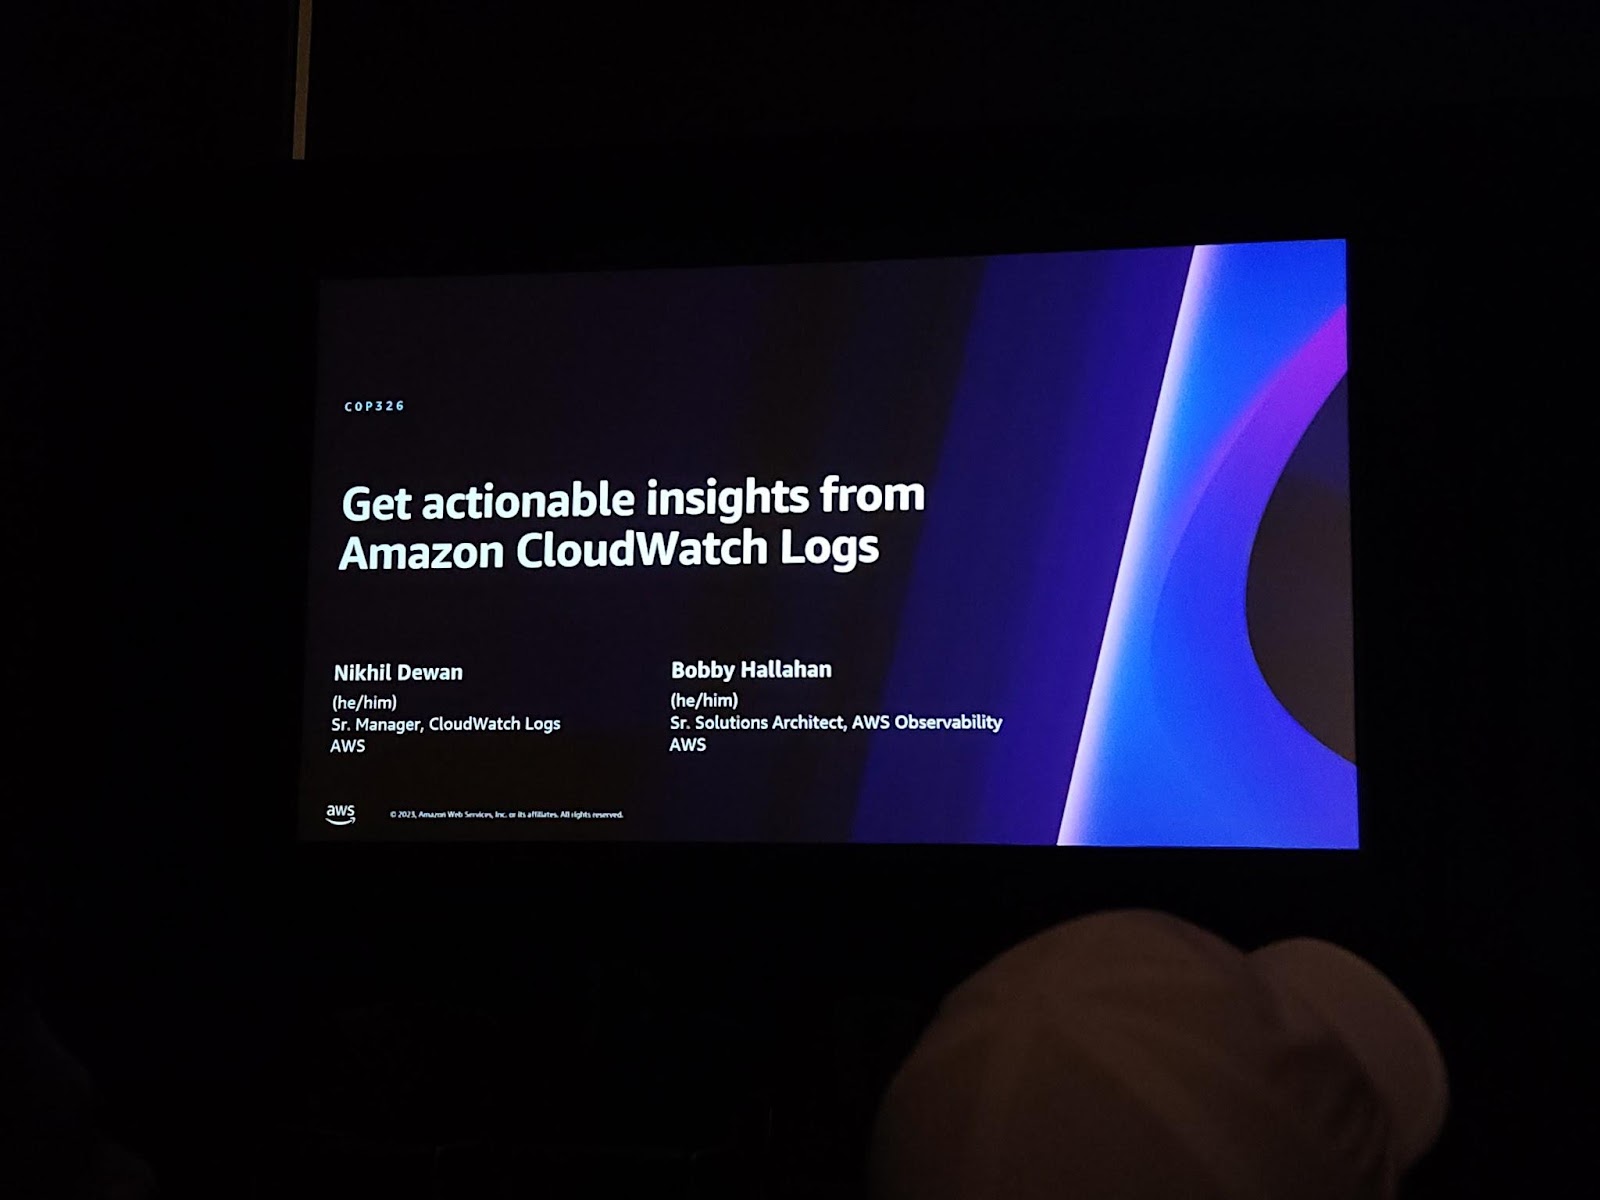 Get actionable insight from Amazon CloudWatch Logs